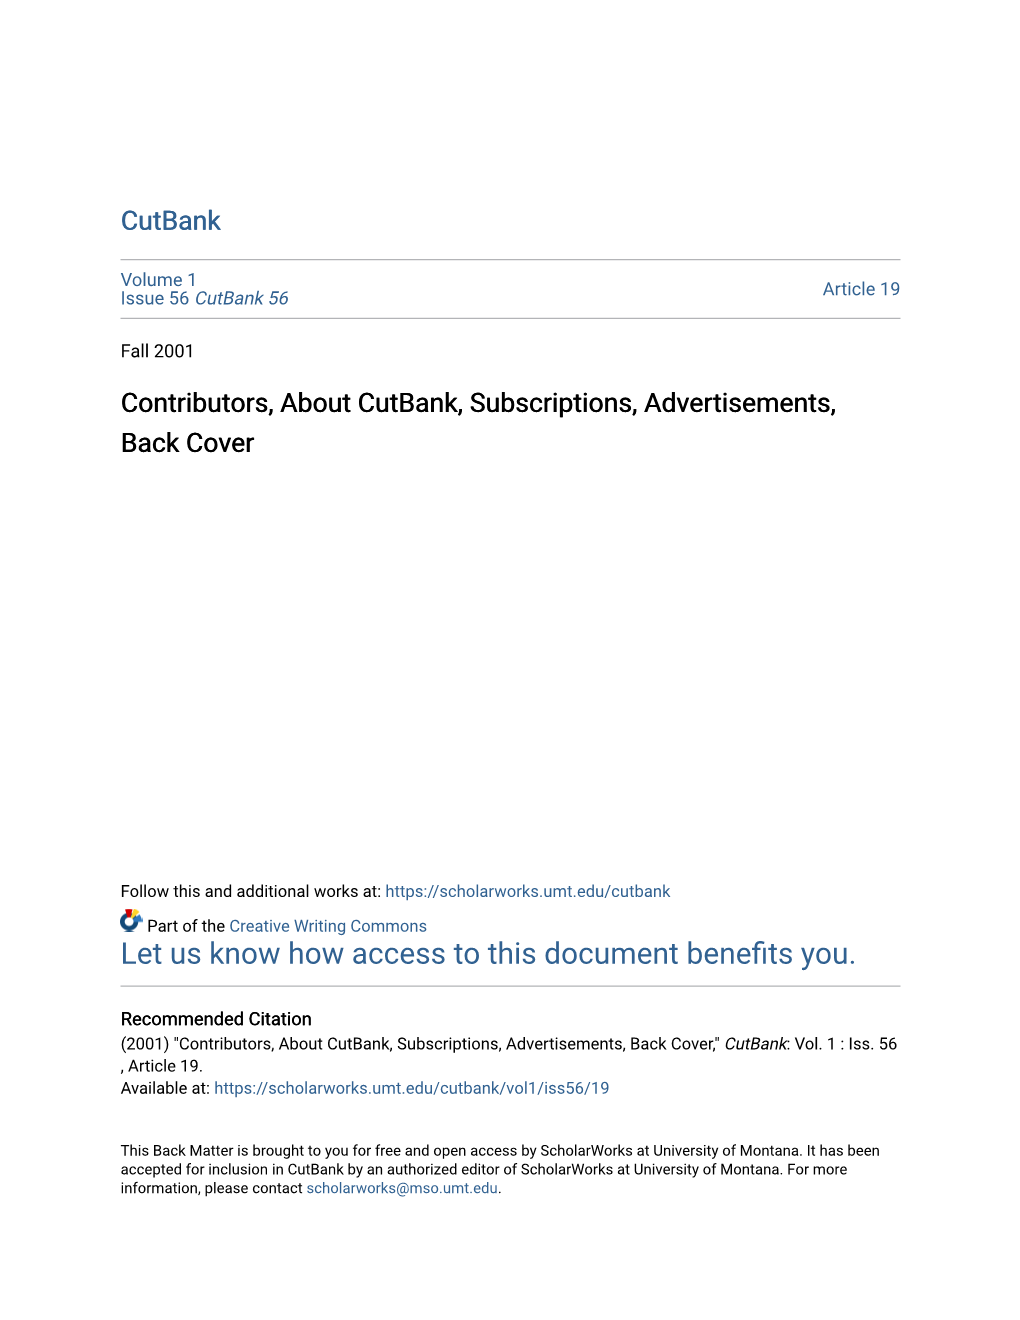 Contributors, About Cutbank, Subscriptions, Advertisements, Back Cover